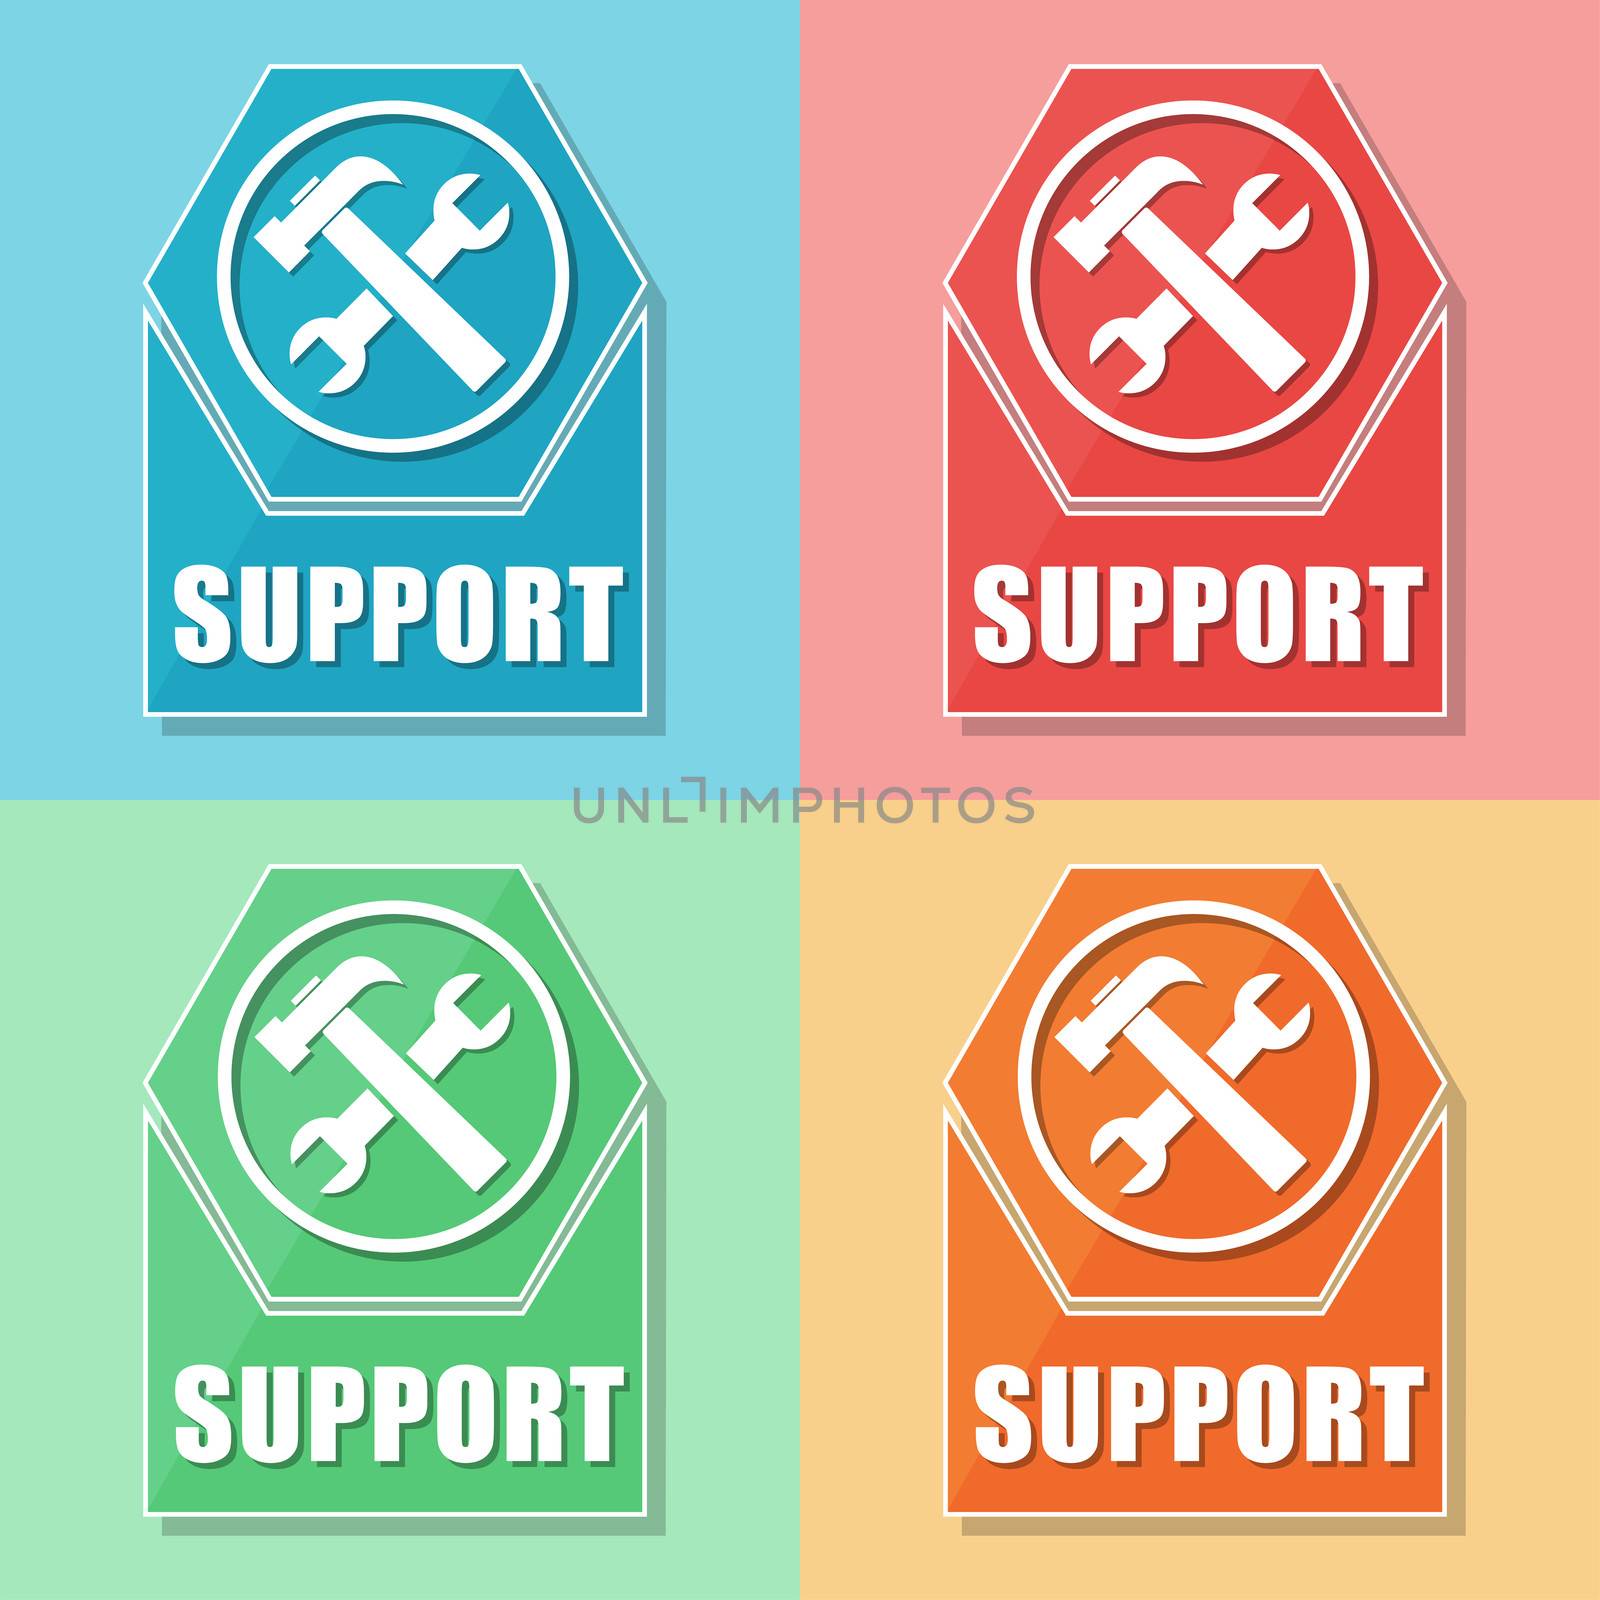 support and tools sign - four colors web icons with symbol, flat design, business service concept